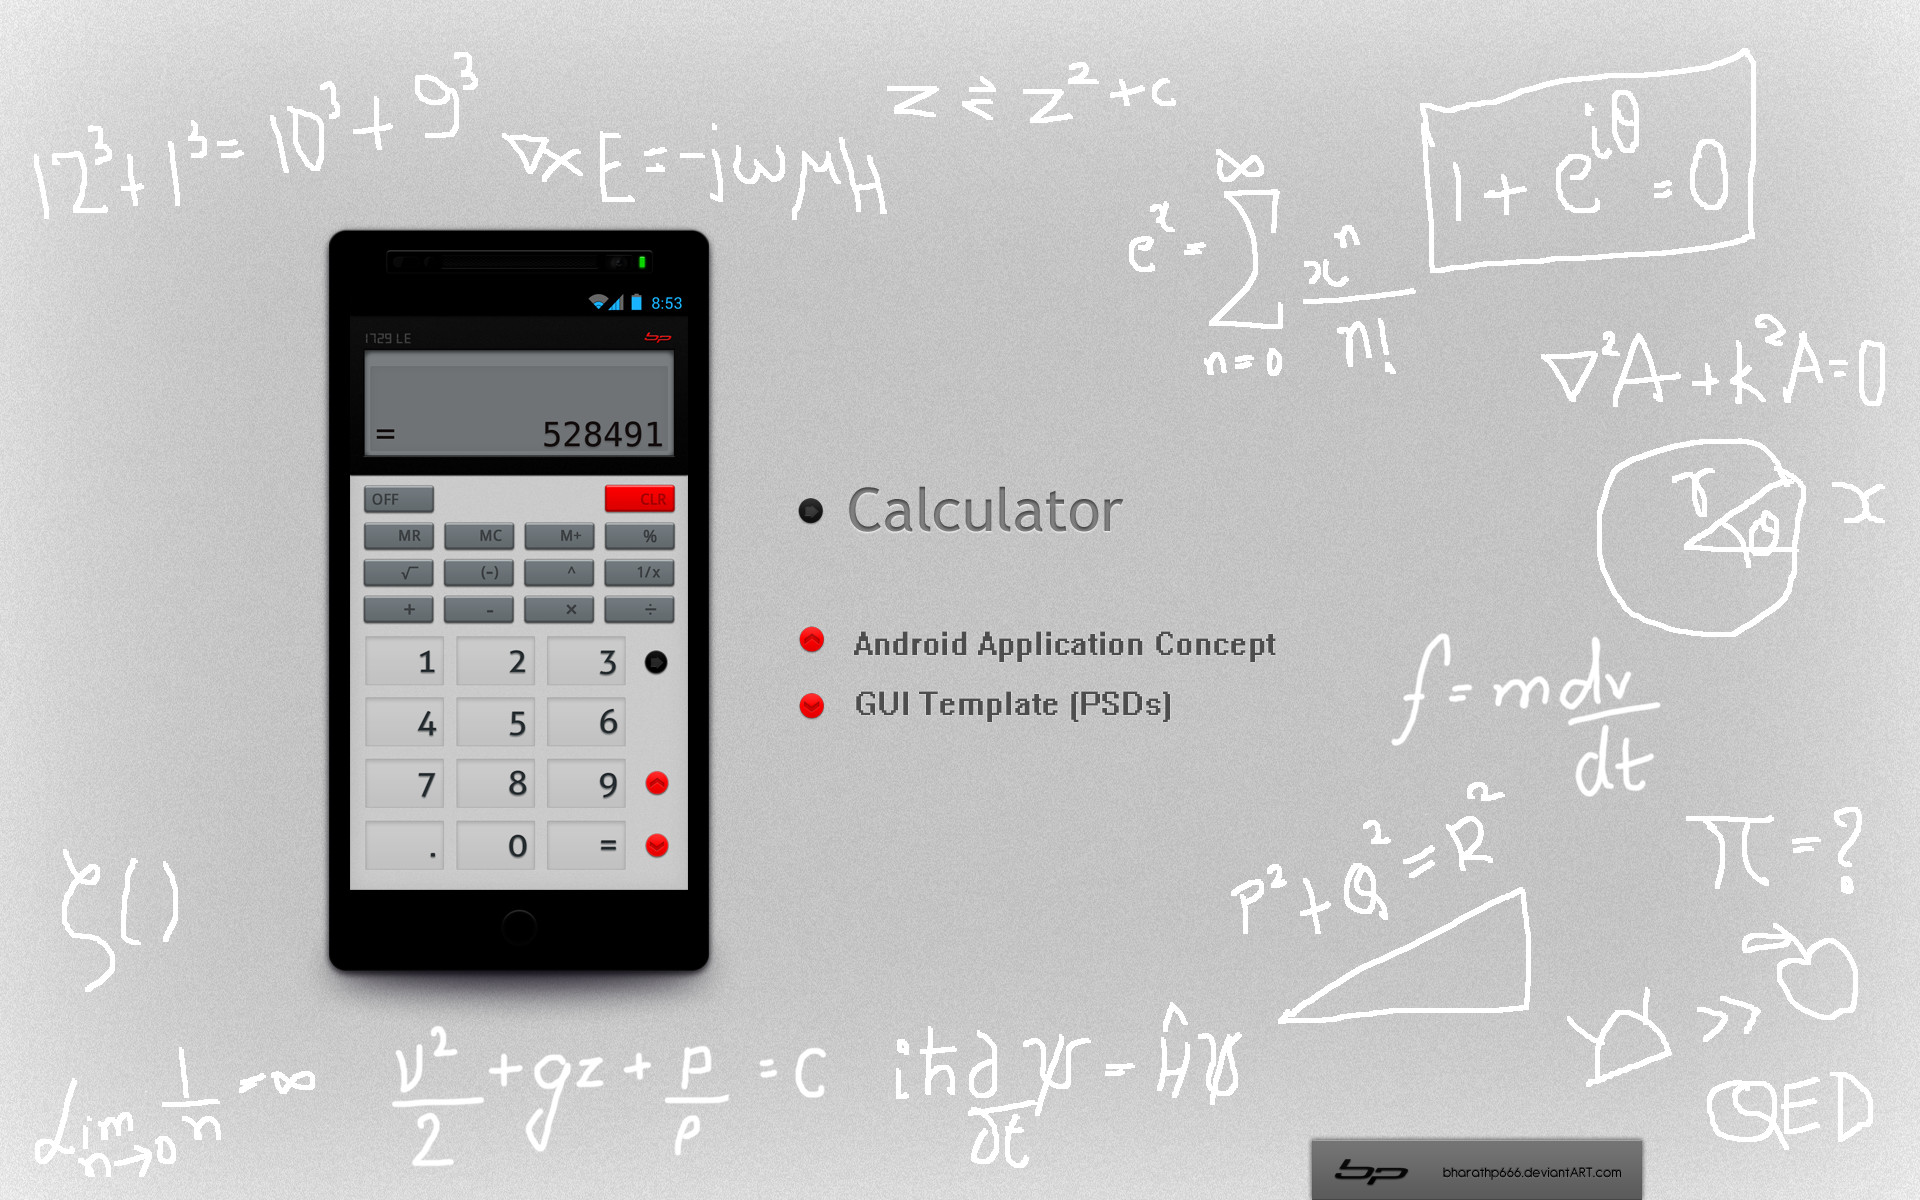 1920x1200 Android Calculator App Concept by bharathp666. Android Calculator App  Concept by bharathp666 on DeviantArt